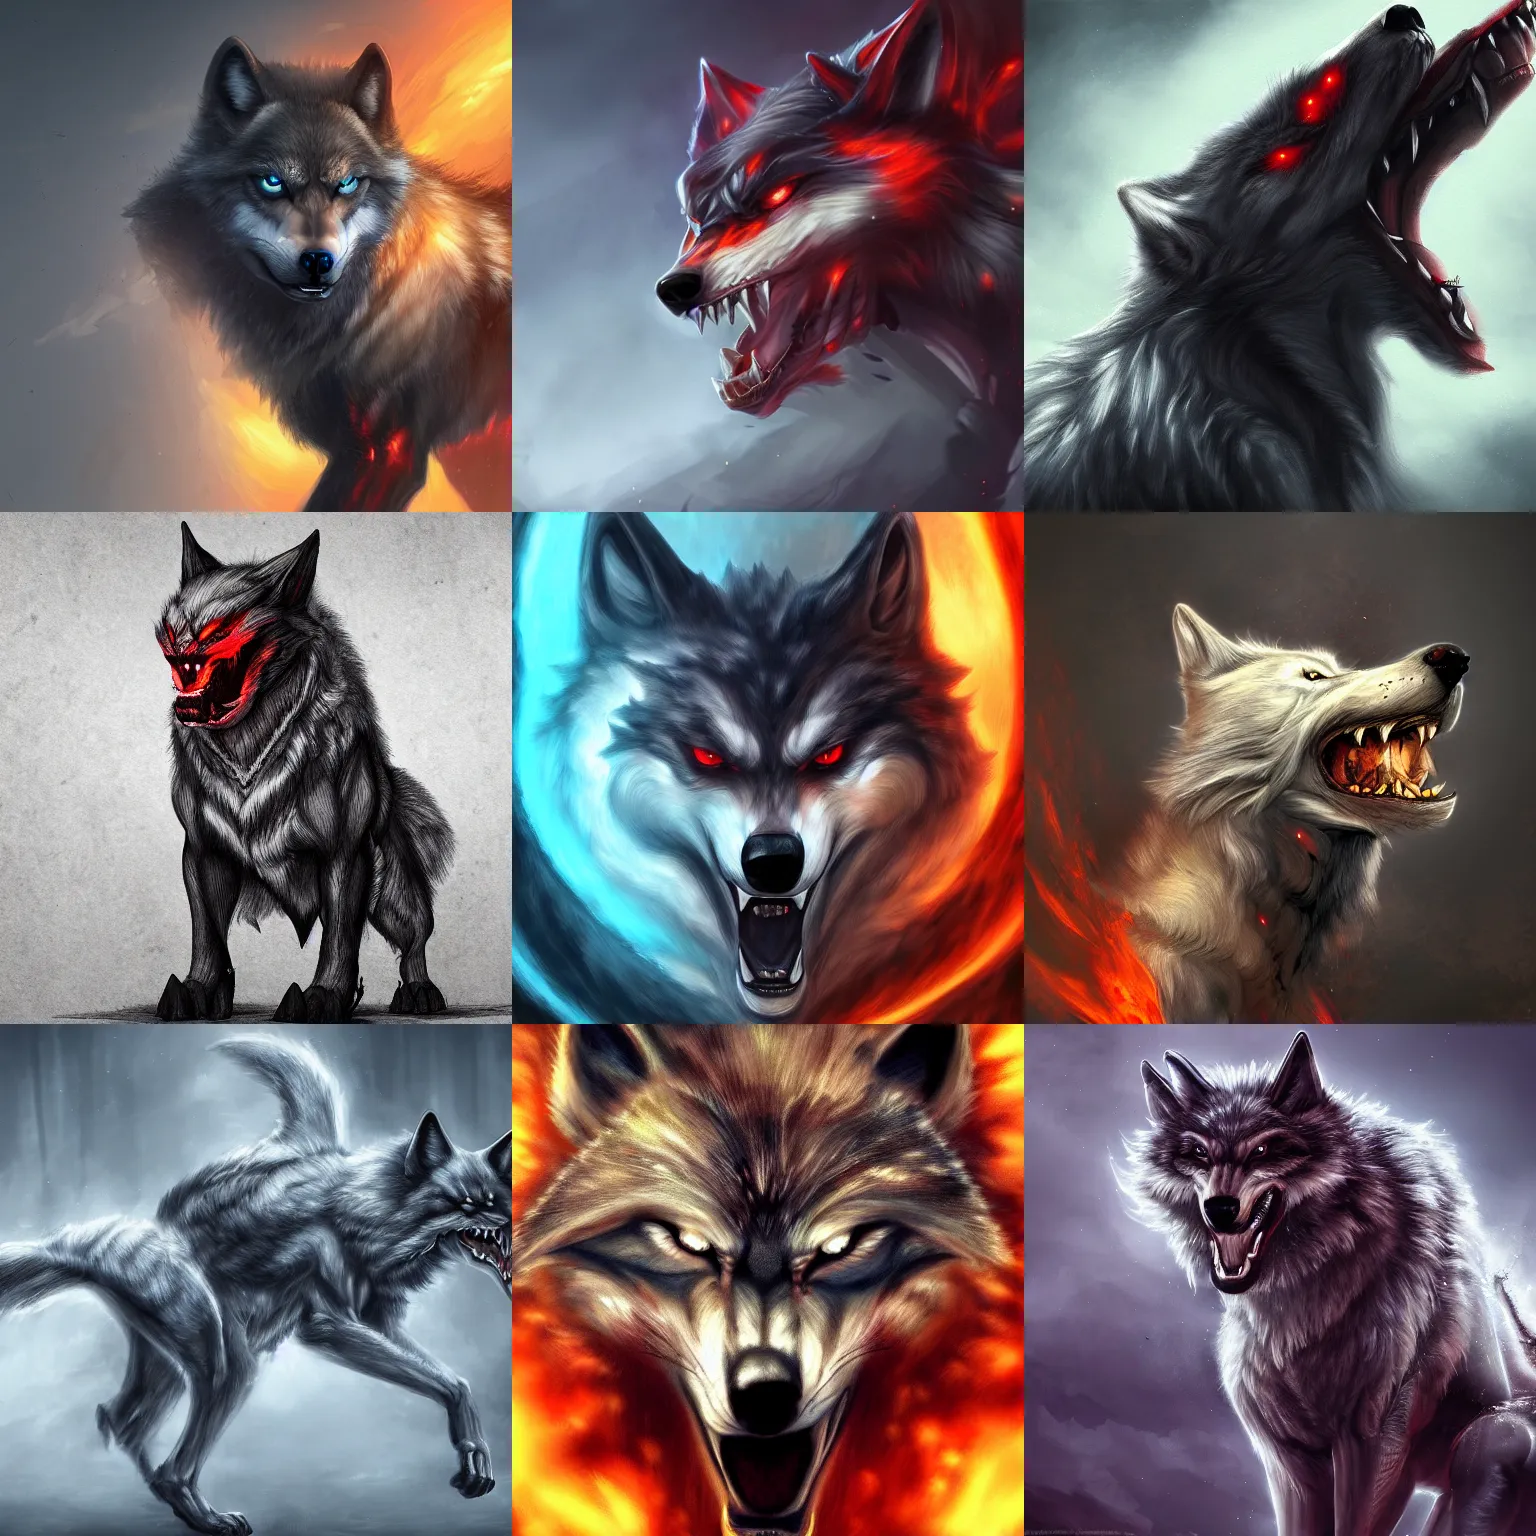 Stream God Demon wolf music  Listen to songs albums playlists for free  on SoundCloud